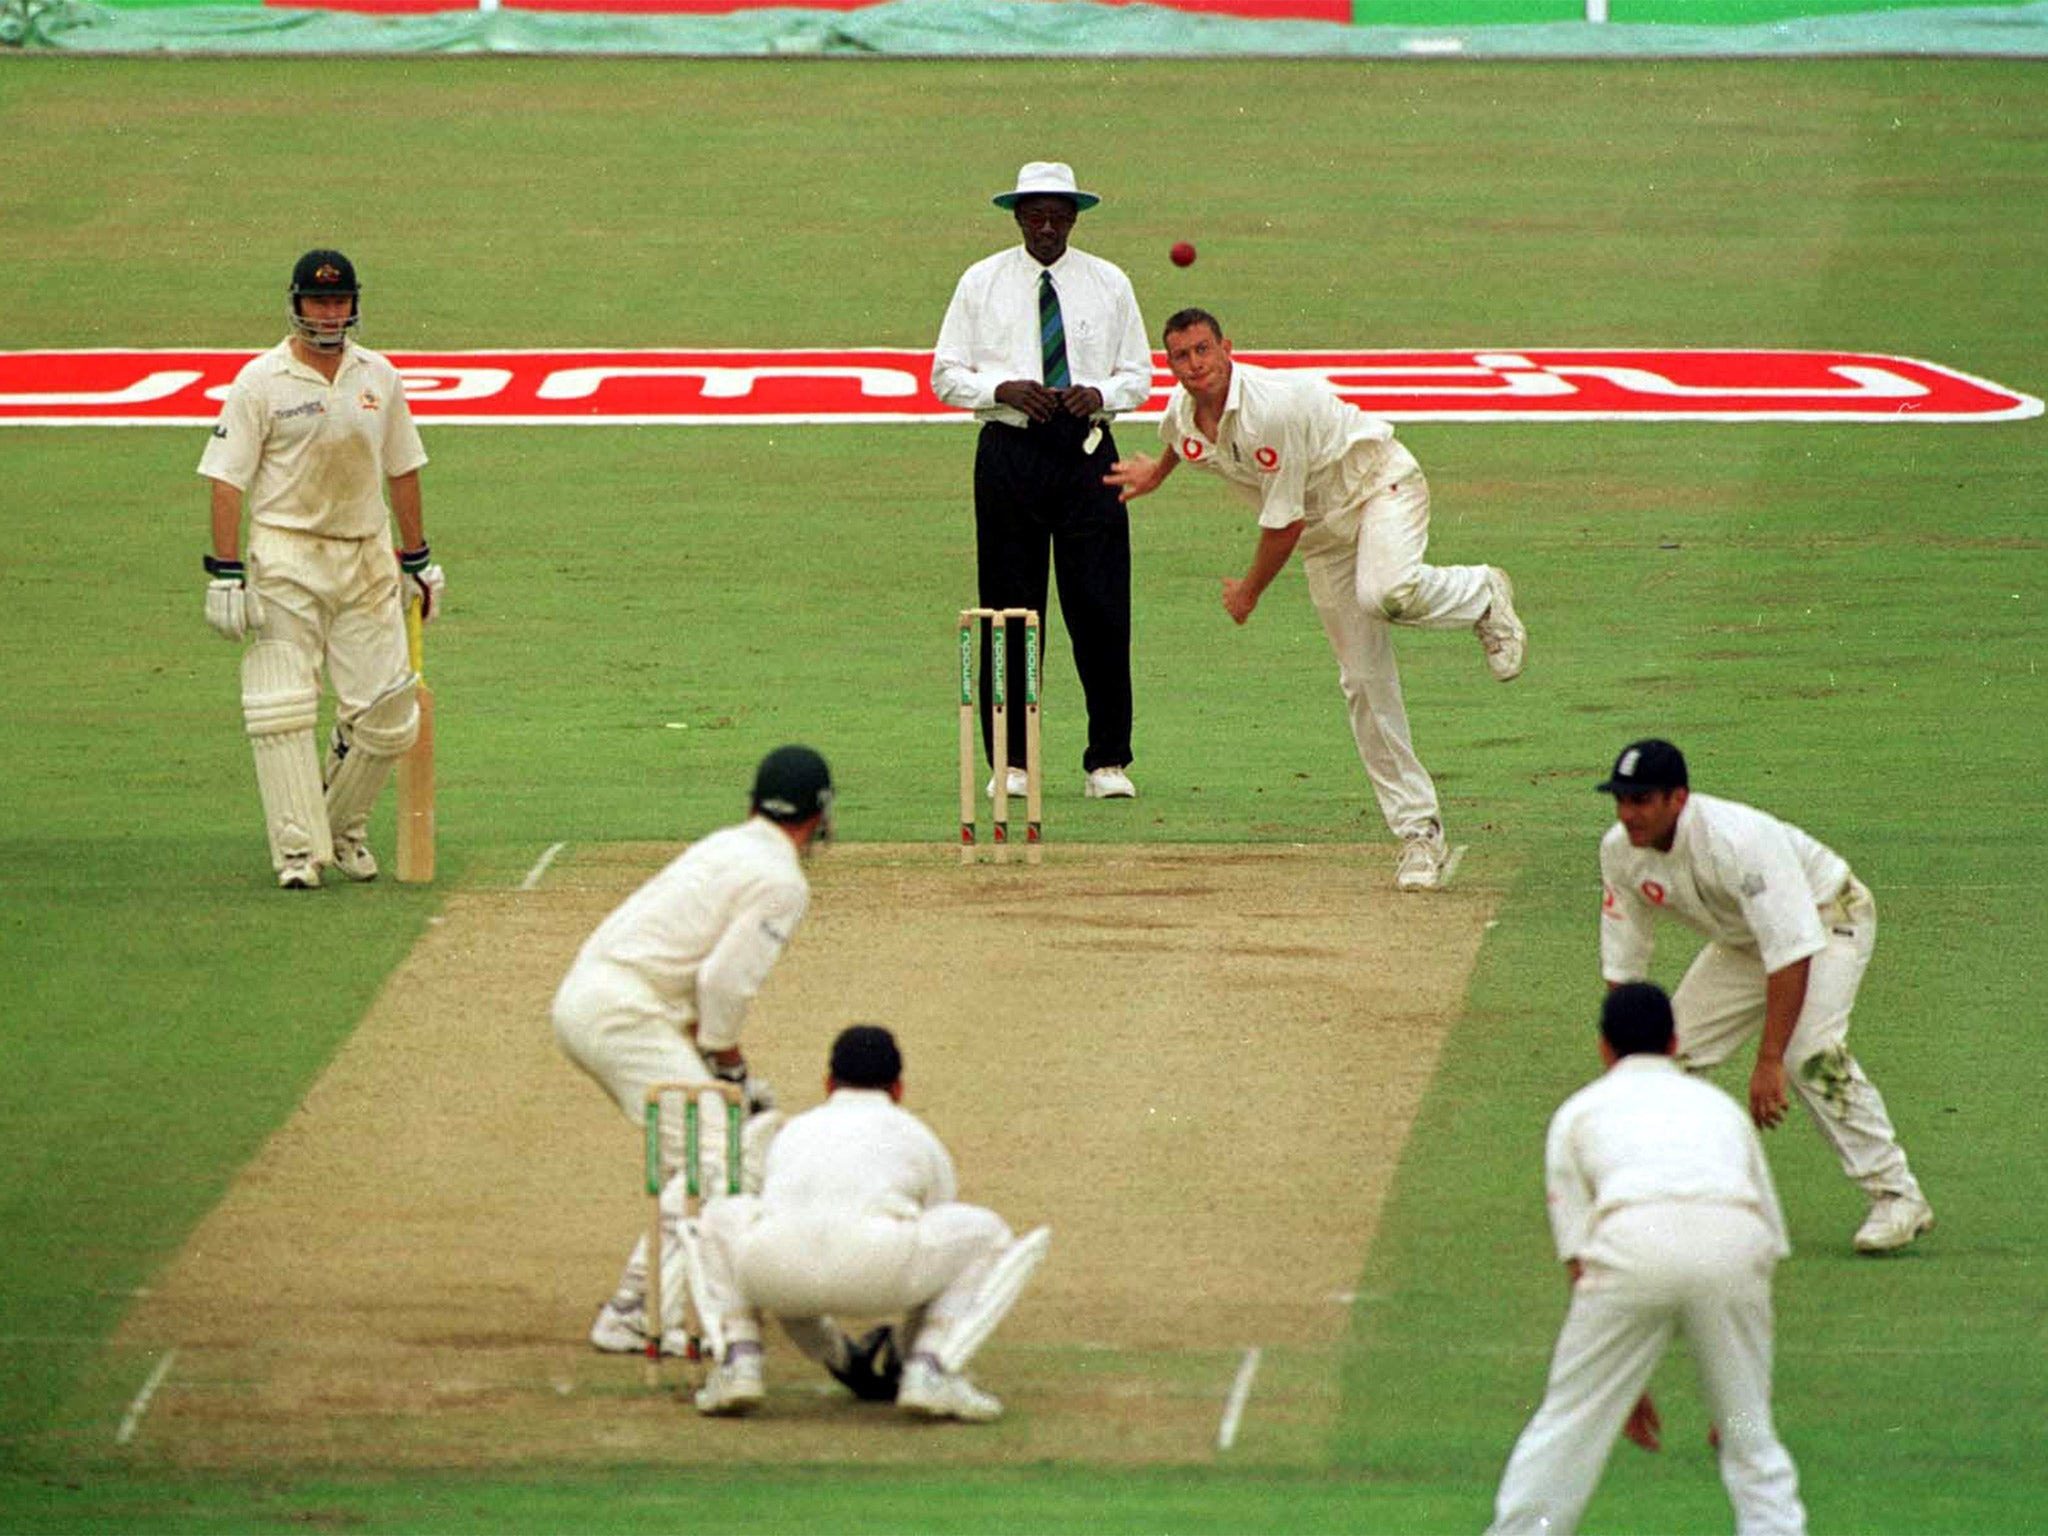 Facing the bowling of Ashley Giles during my Ashes debut at Edgbaston in July 2001